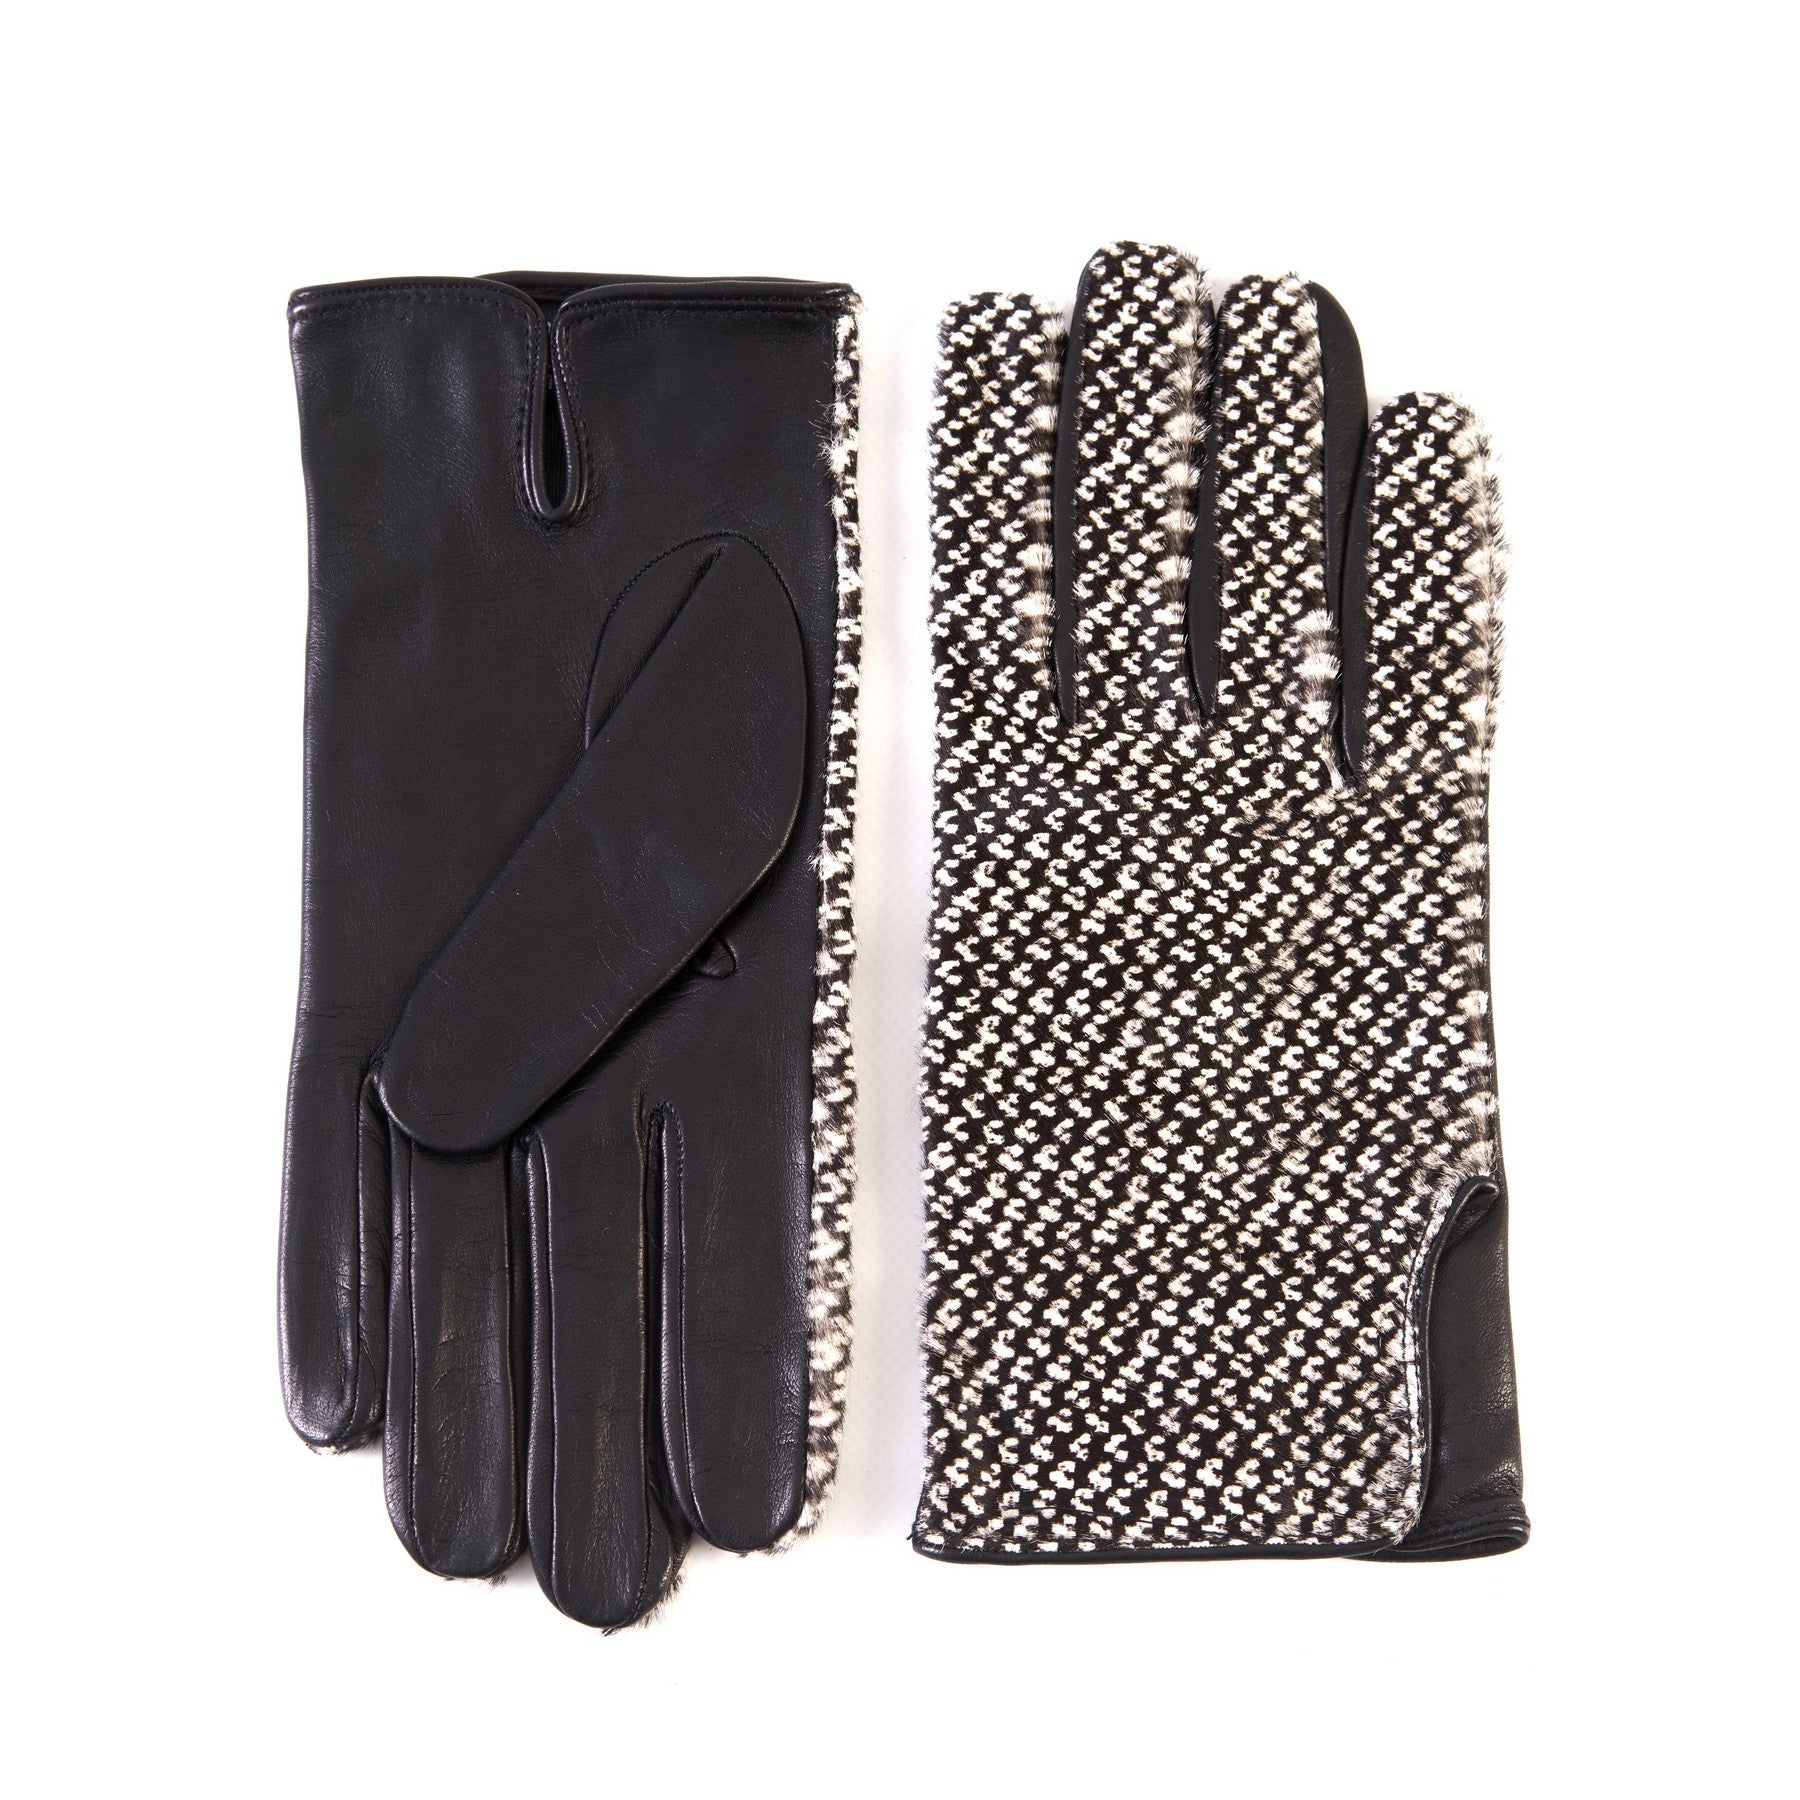 Men's black nappa leather gloves with a pony panel on top and silk lined